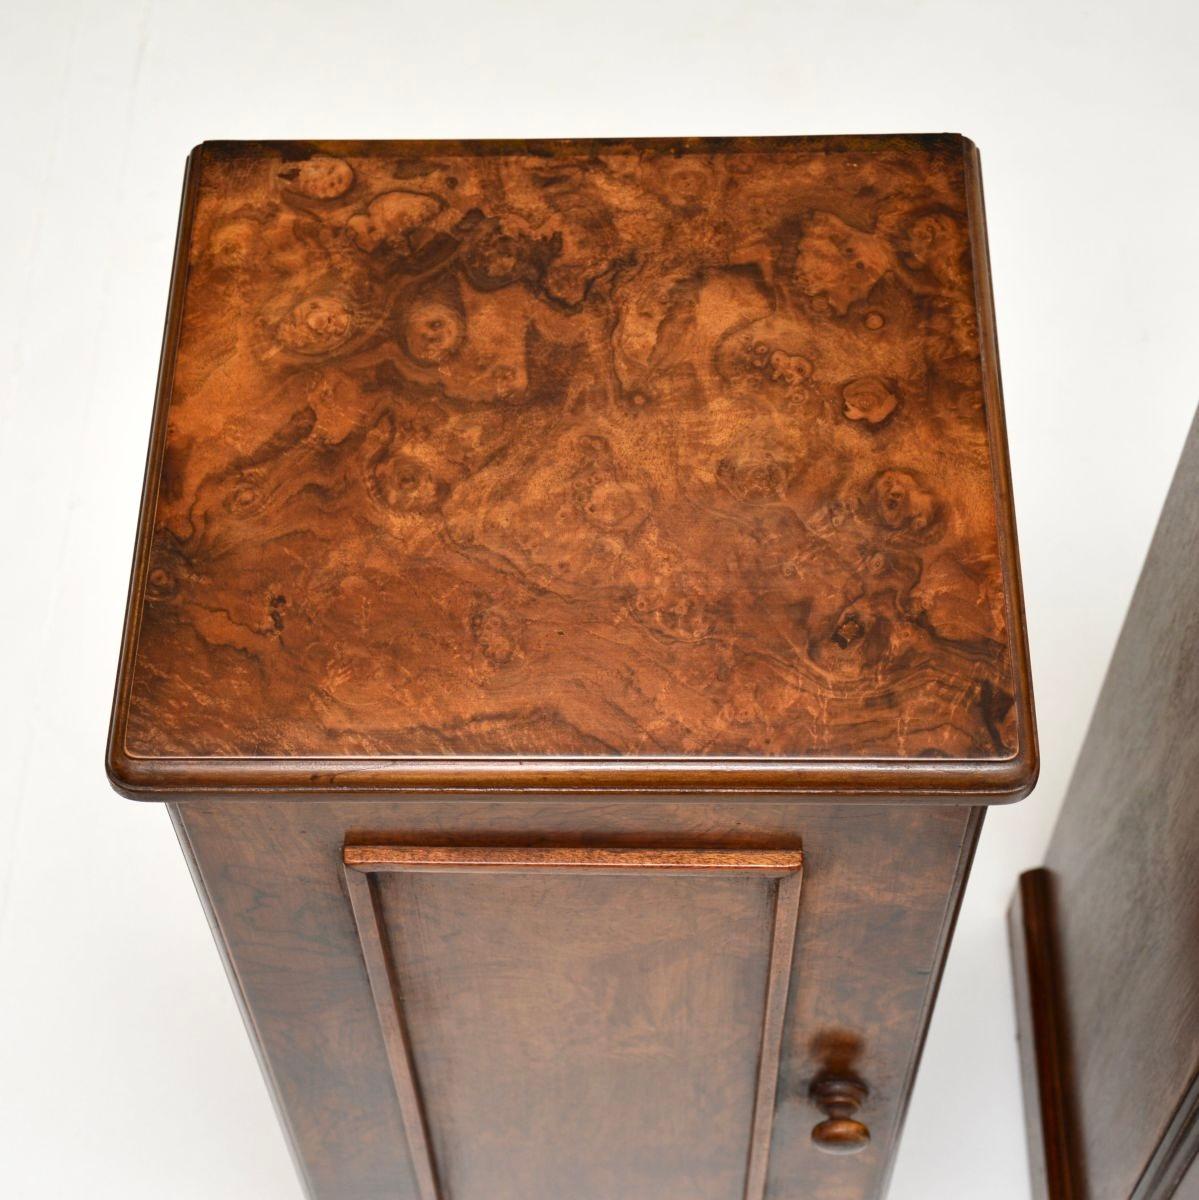 Mid-20th Century Pair of Antique Burr Walnut Bedside Cabinets